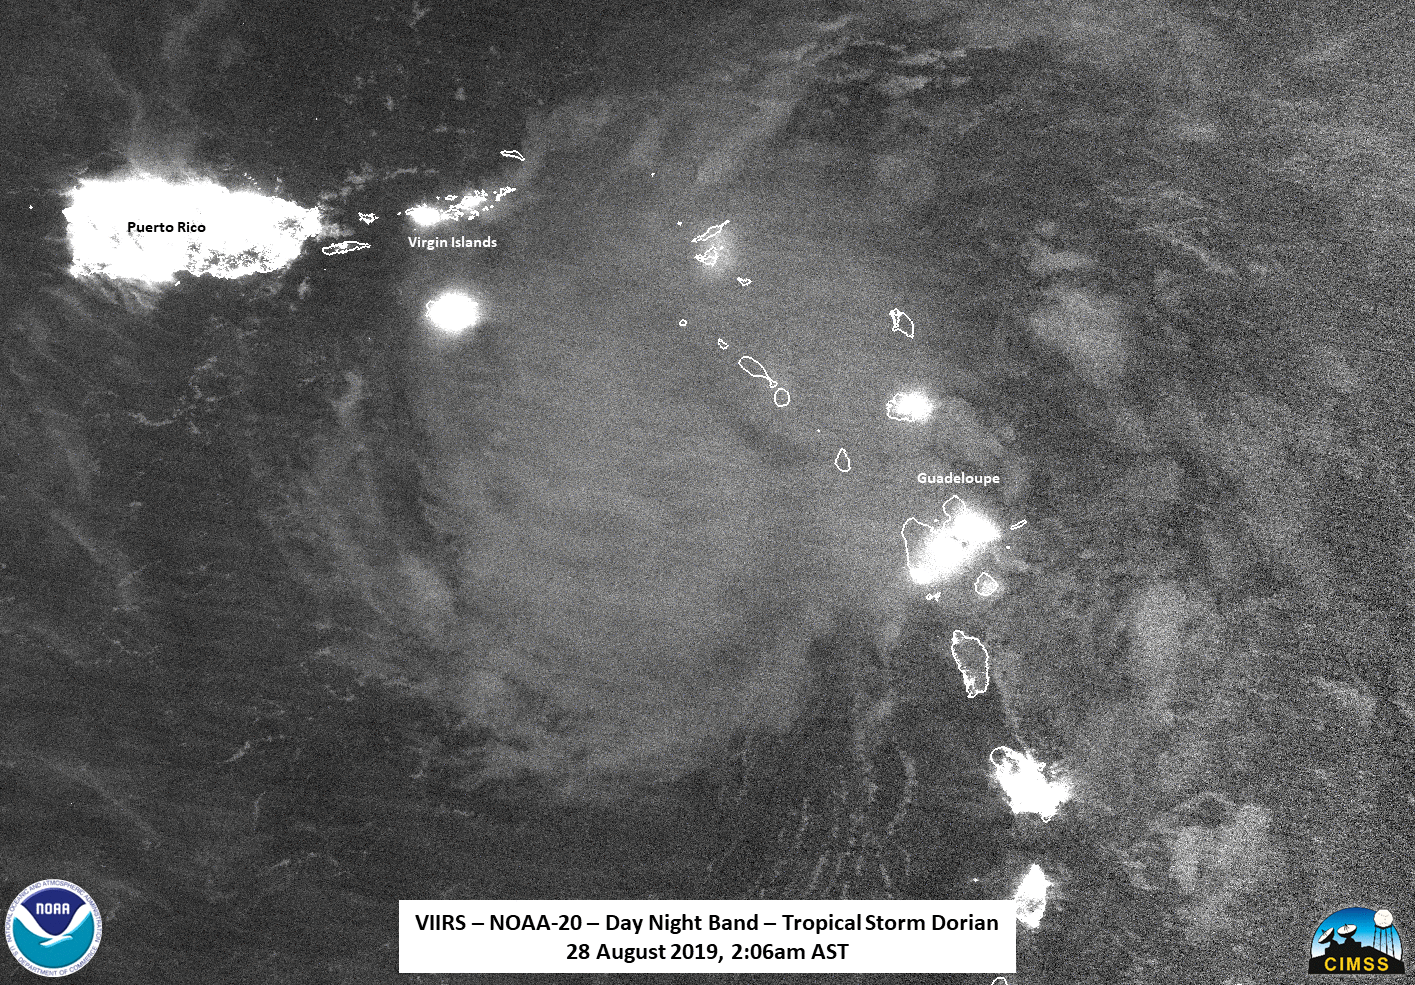 NOAA-20 Day/Night Band (0.7 µm) and Infrared Window (11.45 µm) images, courtesy of William Straka (CIMSS) [click to enlarge]